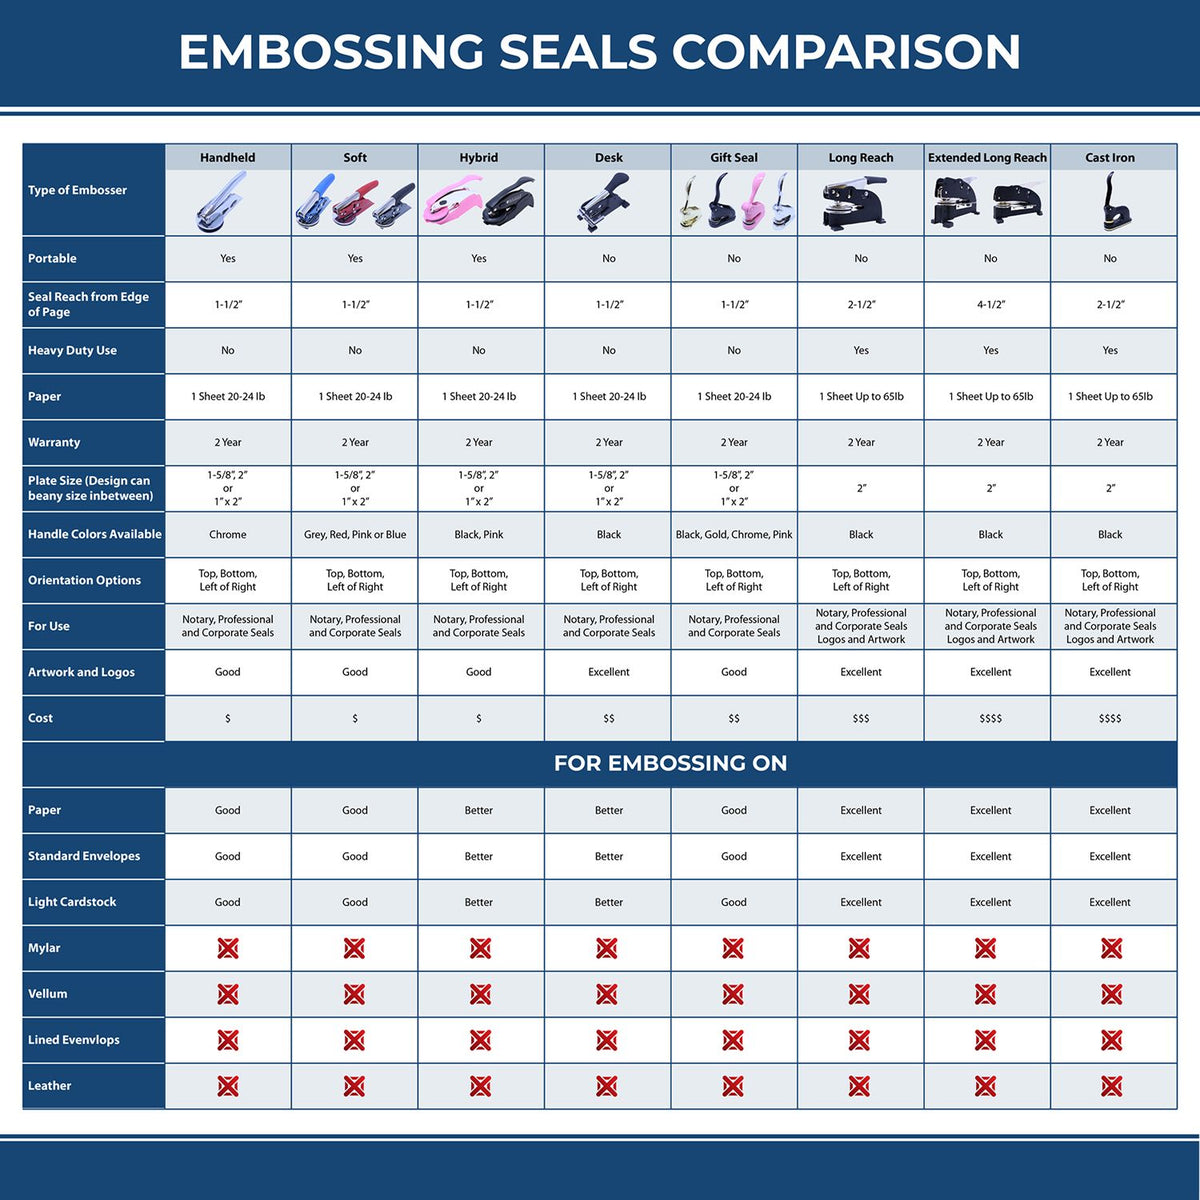 A comparison chart for the different types of mount models available for the Handheld Nevada Architect Seal Embosser.